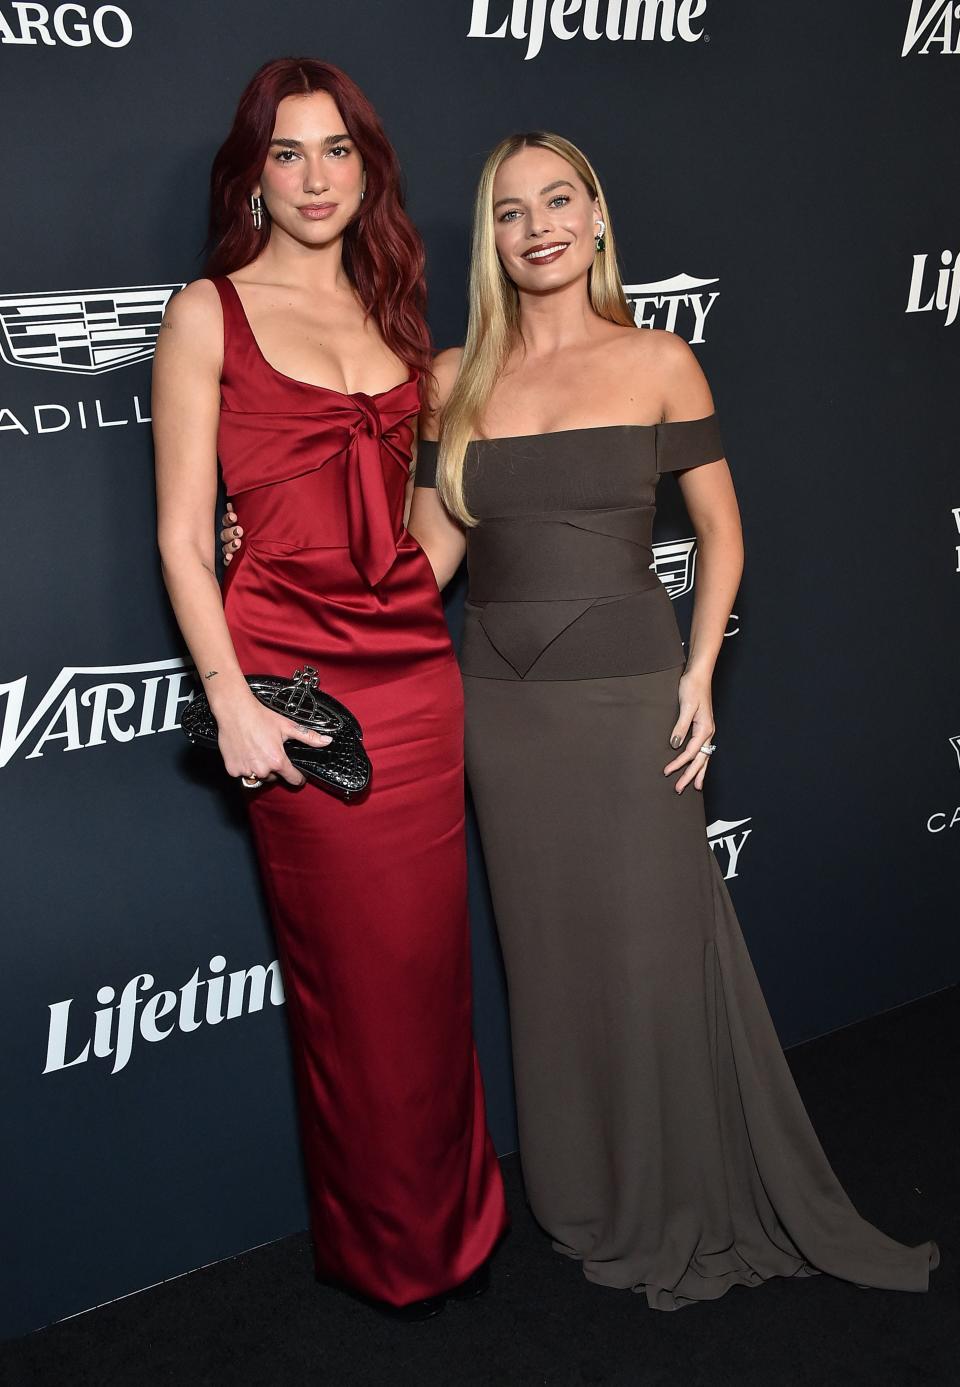 Mermaid Barbie Dua Lipa and the one and only Barbie Margot Robbie reunite at Variety's Power of Women in Los Angeles.